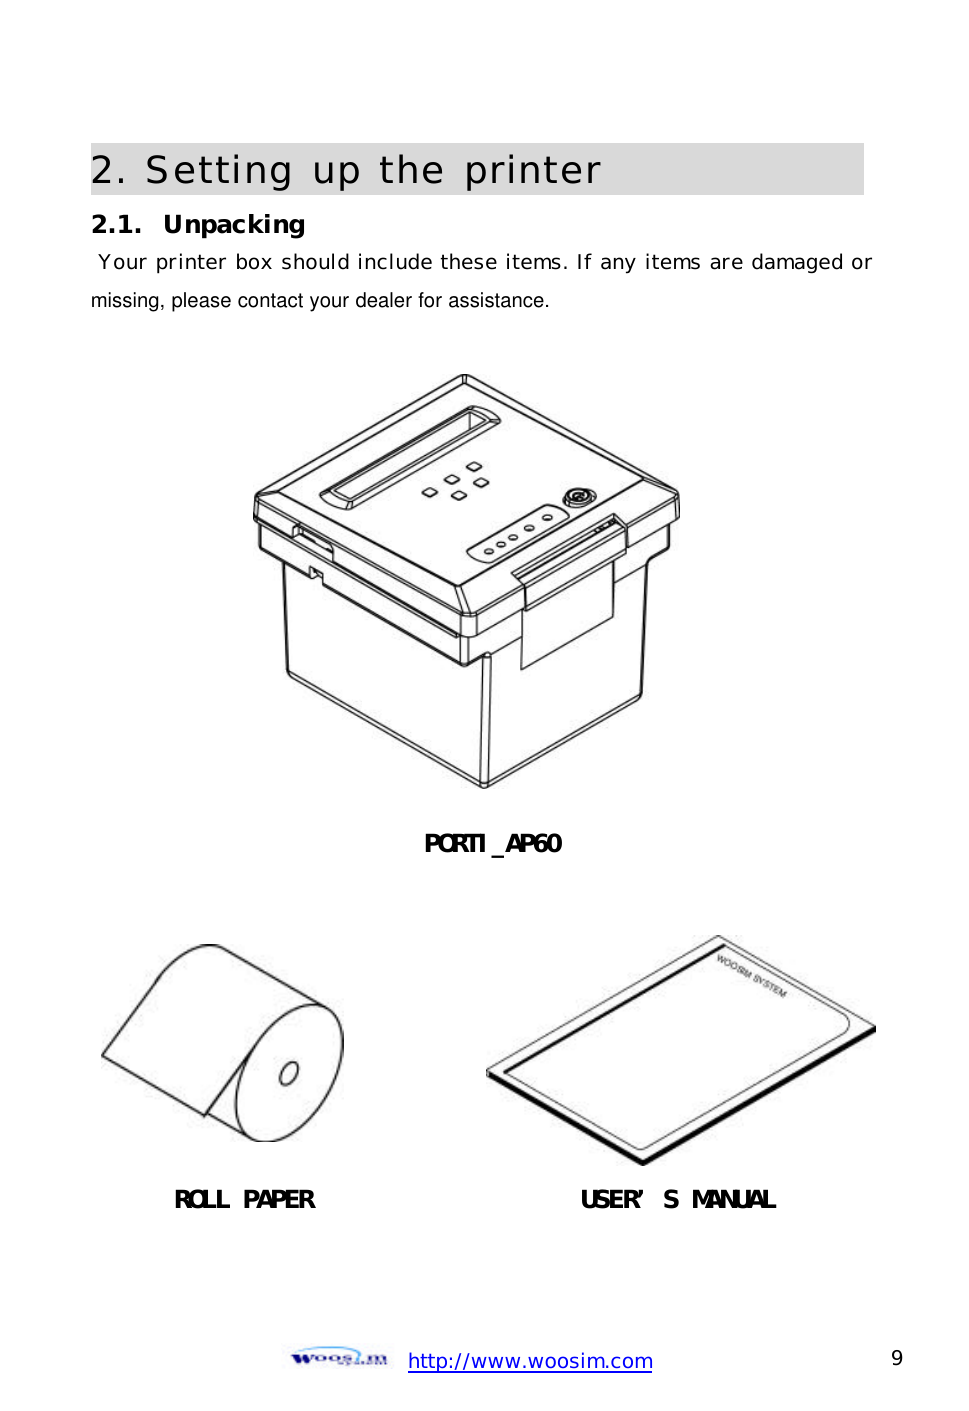  http://www.woosim.com 9                                2. Setting up the printer                2.1.  Unpacking  Your printer box should include these items. If any items are damaged or missing, please contact your dealer for assistance.                       PORTI_AP60   ROLL PAPER USER’S MANUAL 